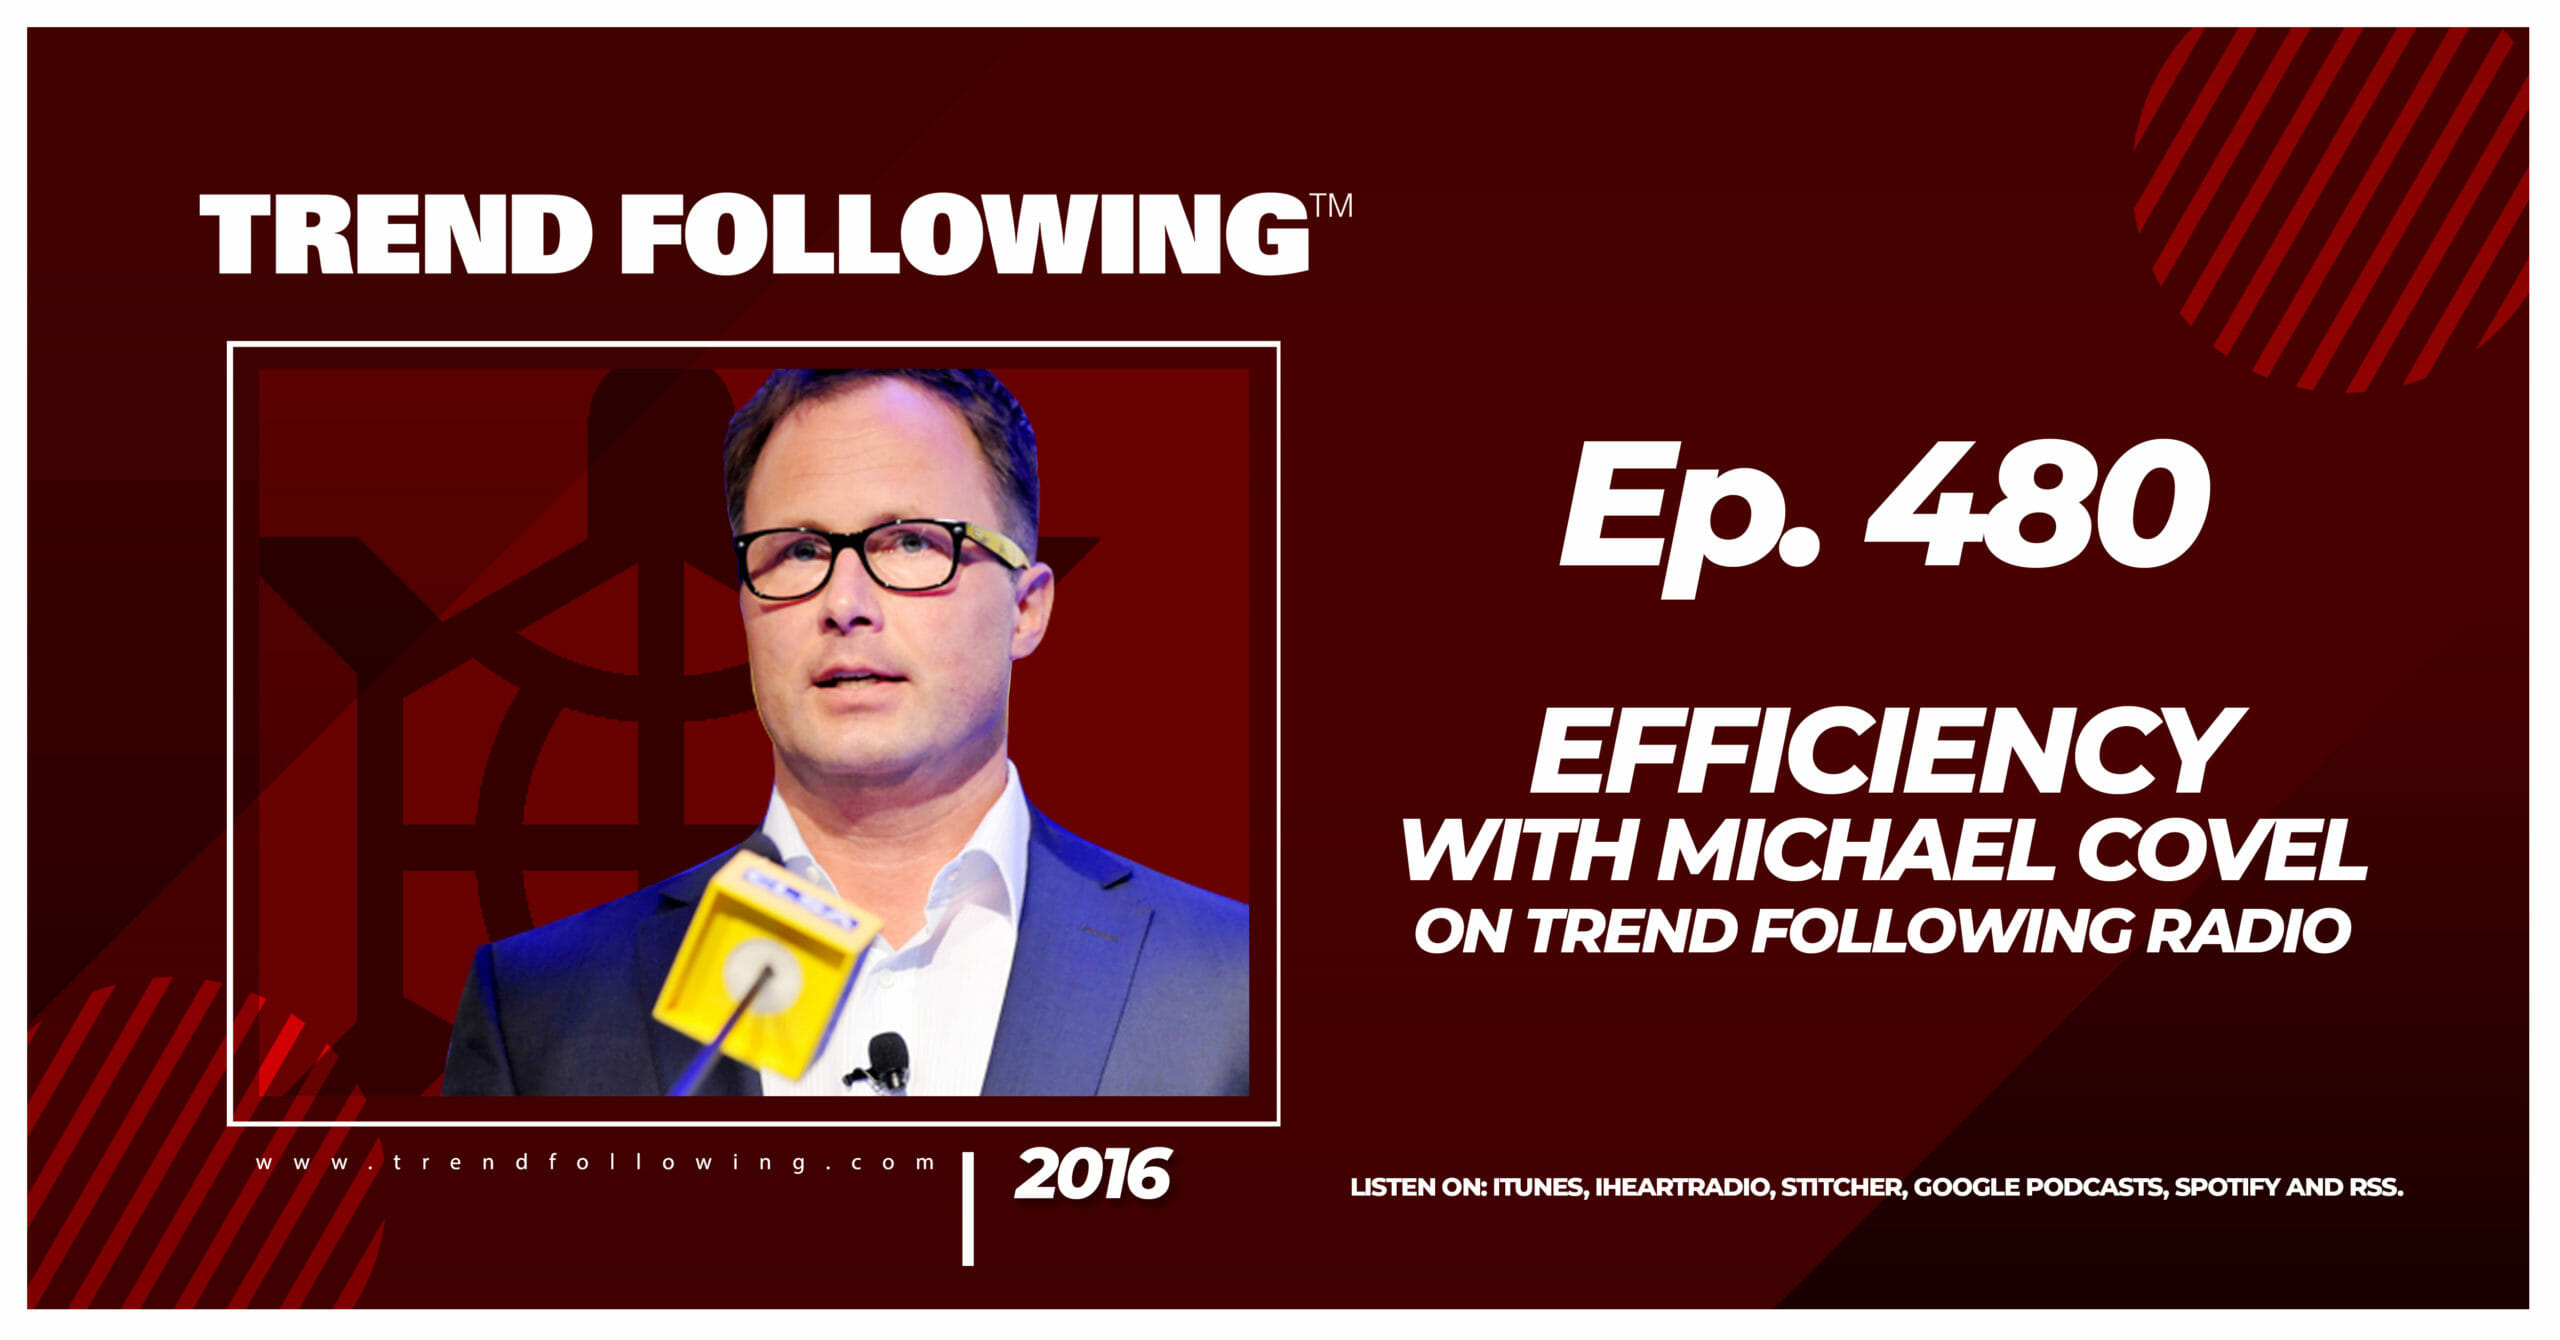 Efficiency with Michael Covel on Trend Following Radio